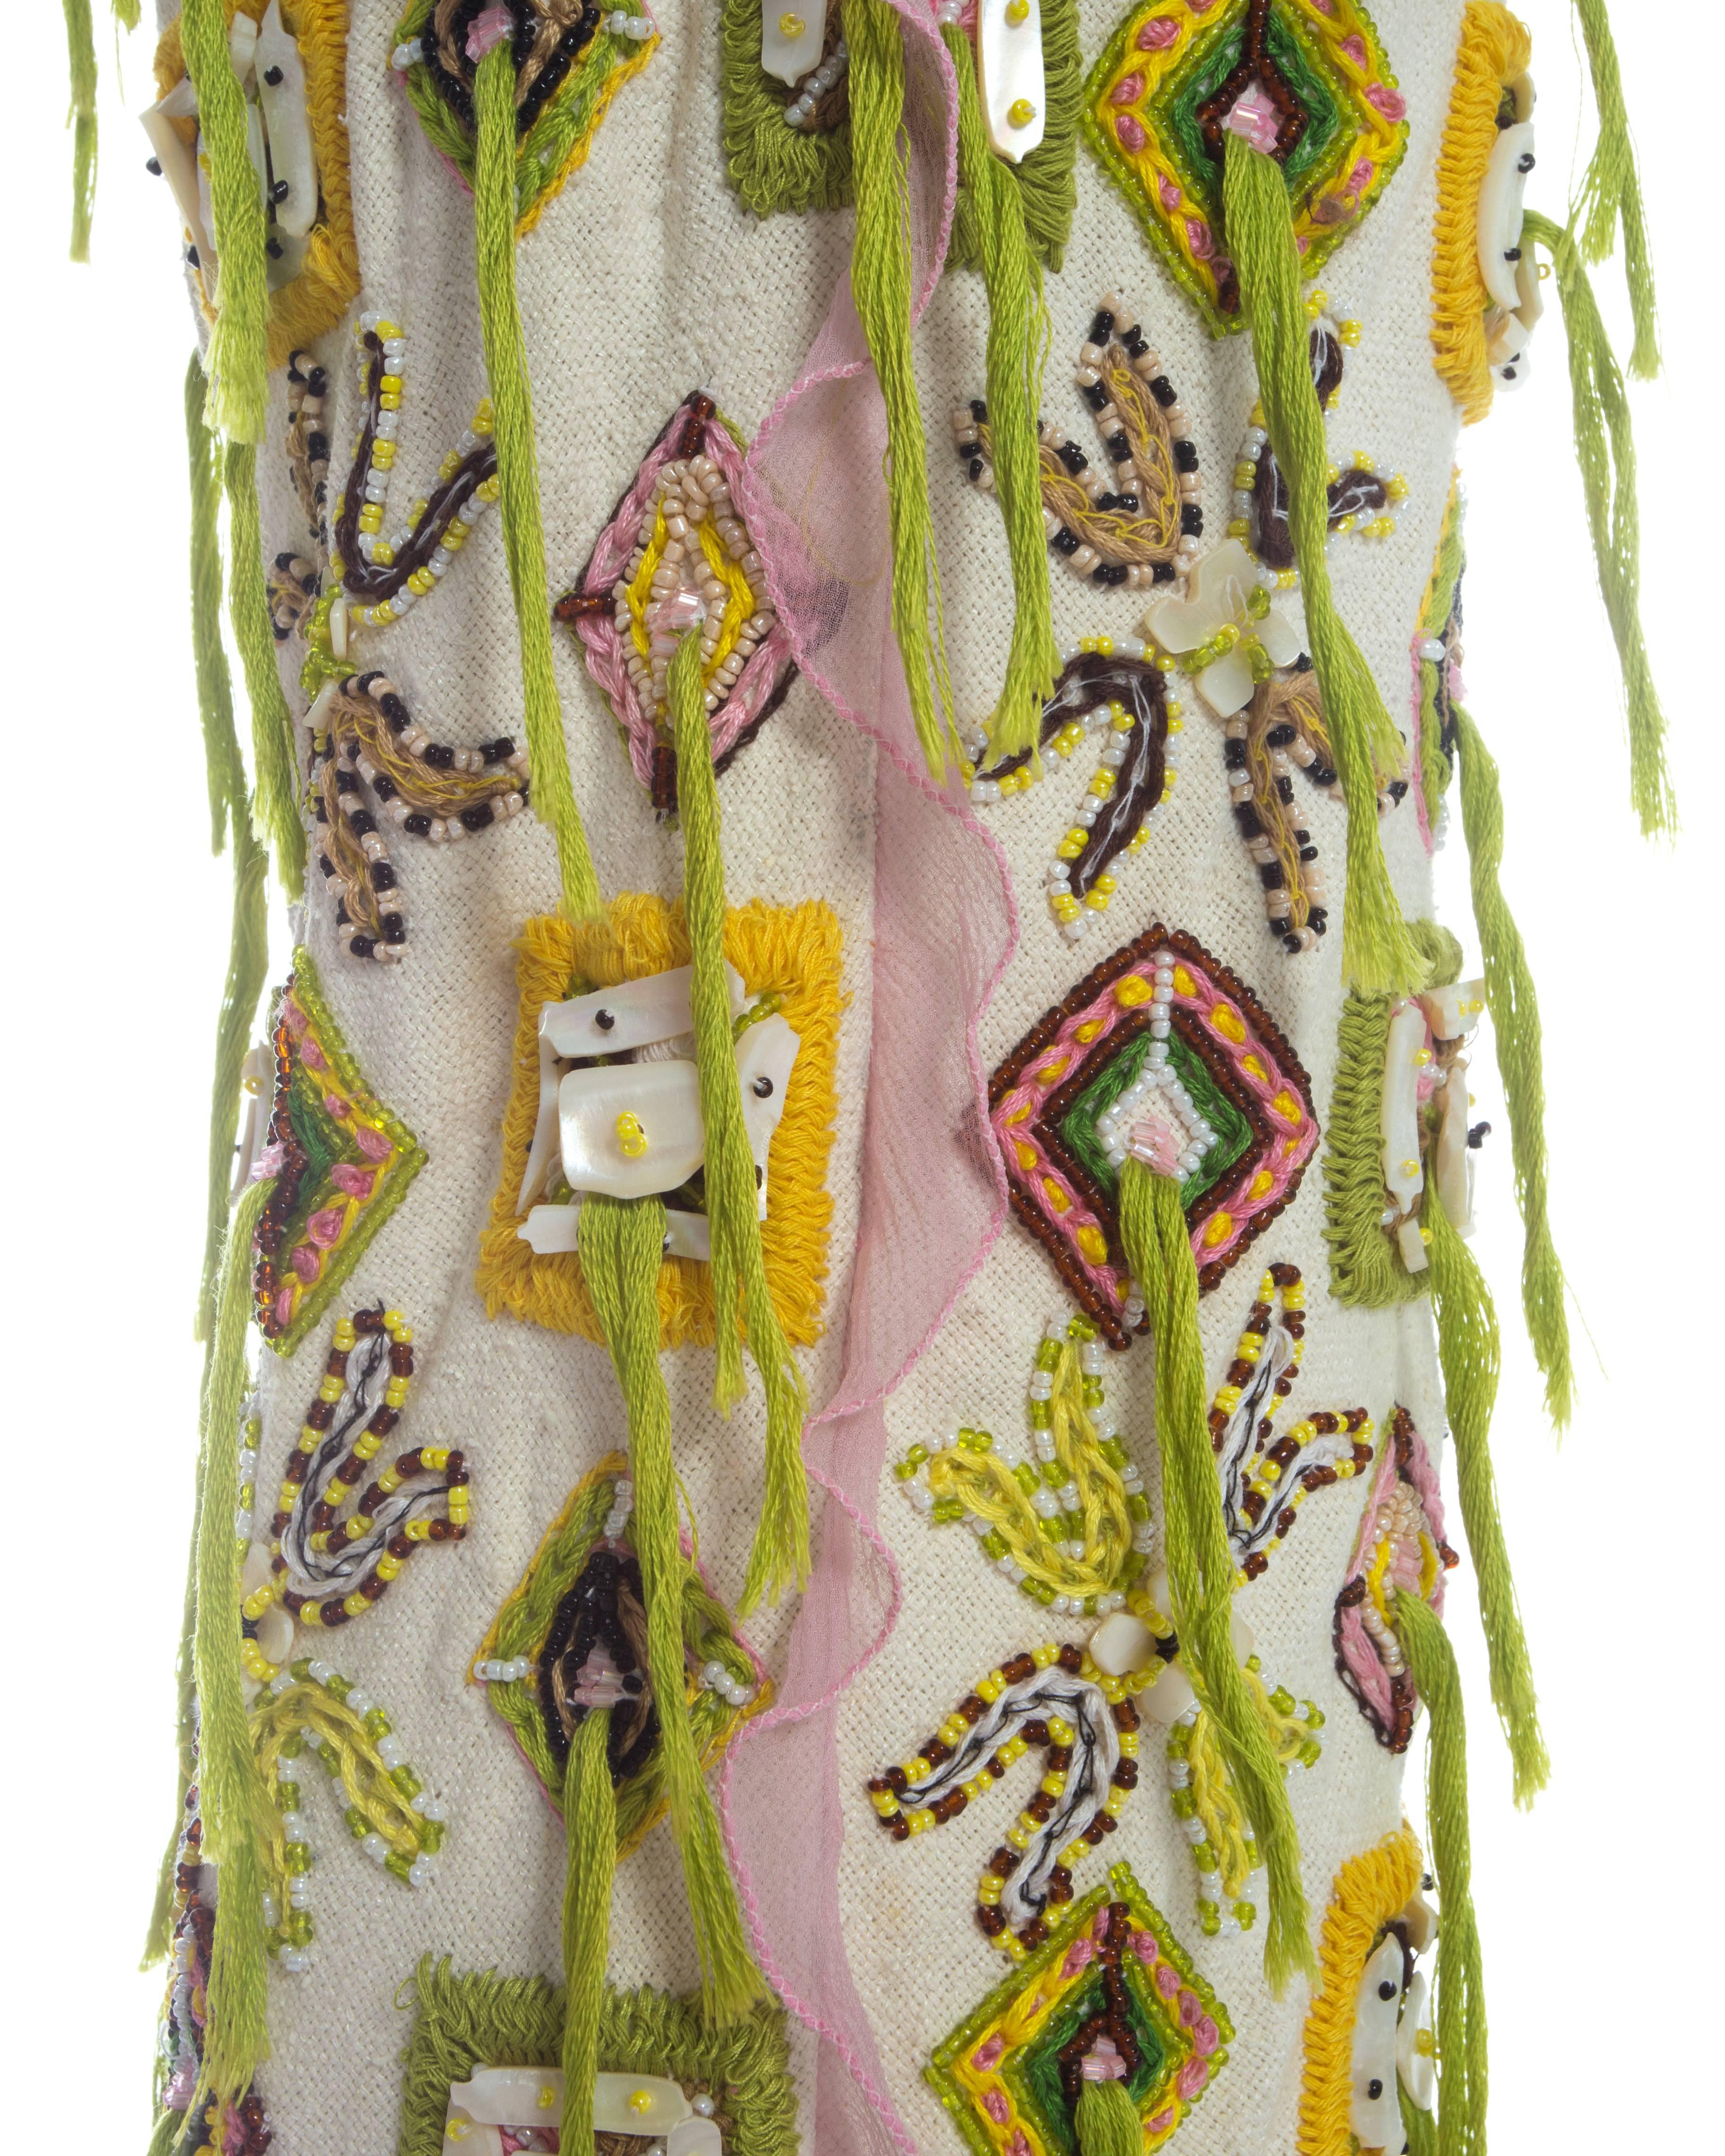 Fendi embroidered cotton pant suit fringed with silk thread, S / S 2000 1